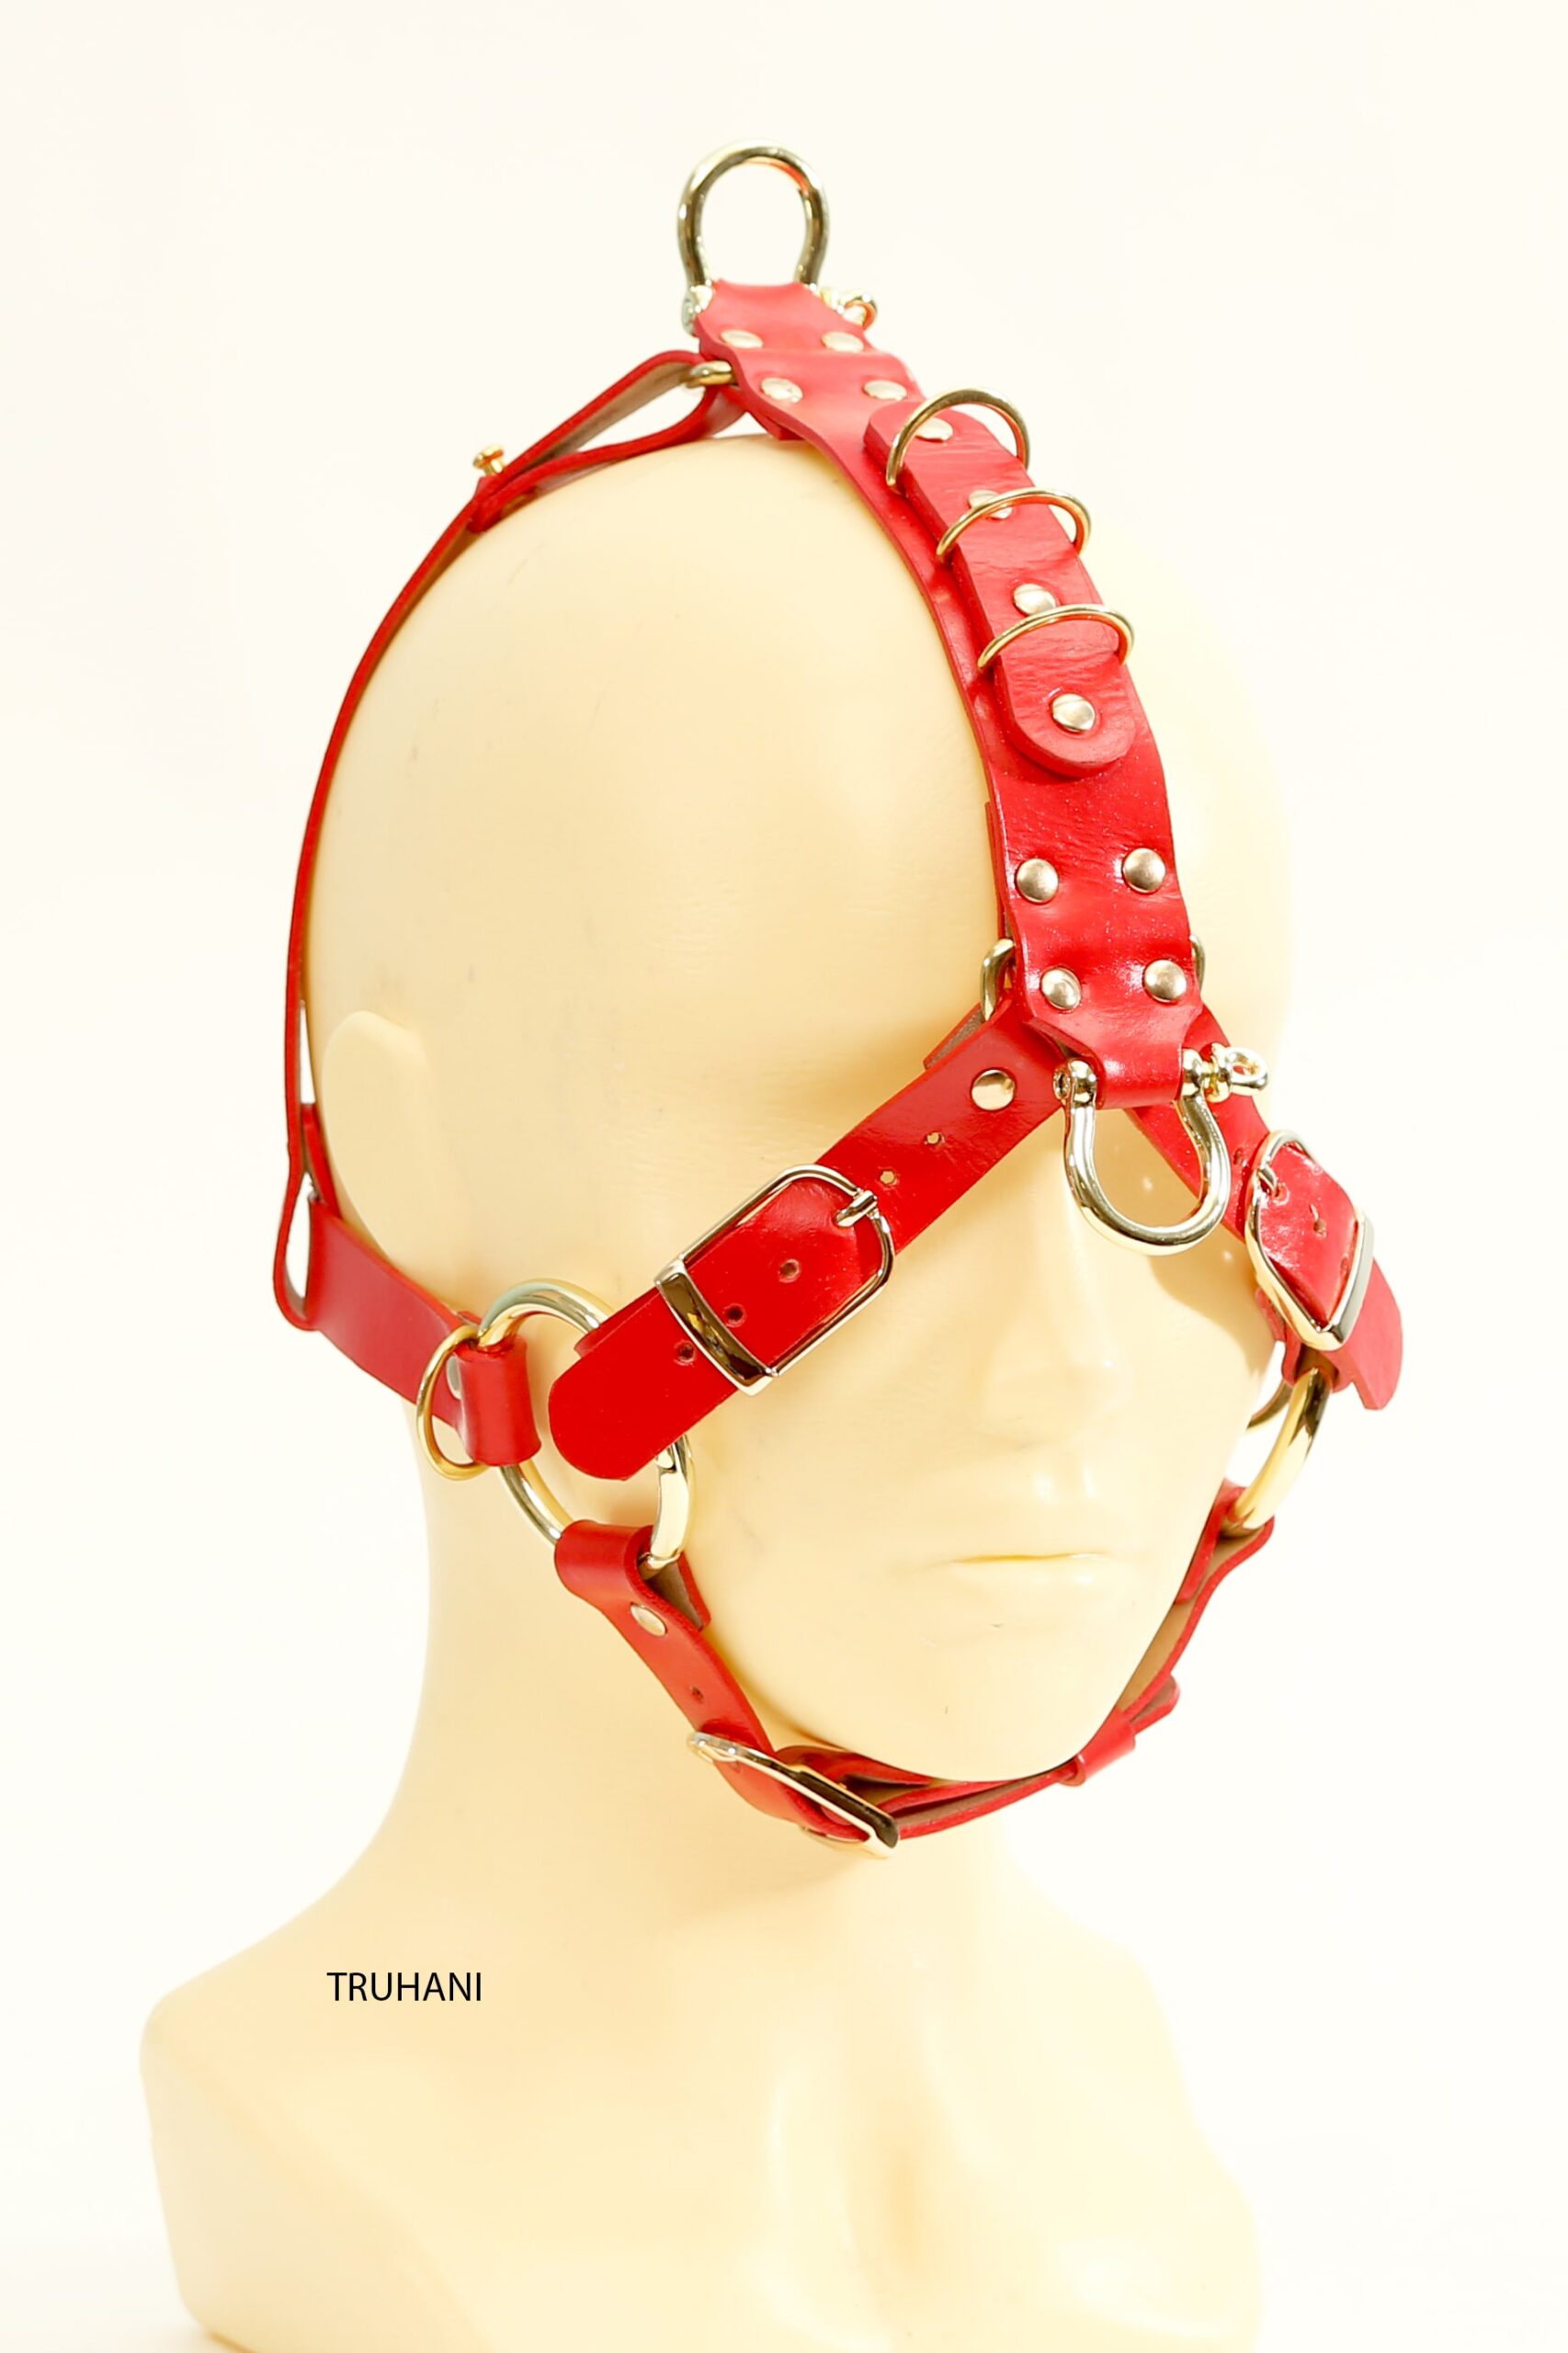 Red leather fetish submissive gag mouth dilator mask for BDSM sex fantasy with open oral fixation. Sexy restraint horse mask with snaffle bit. Bridle for pony play and Kinky party